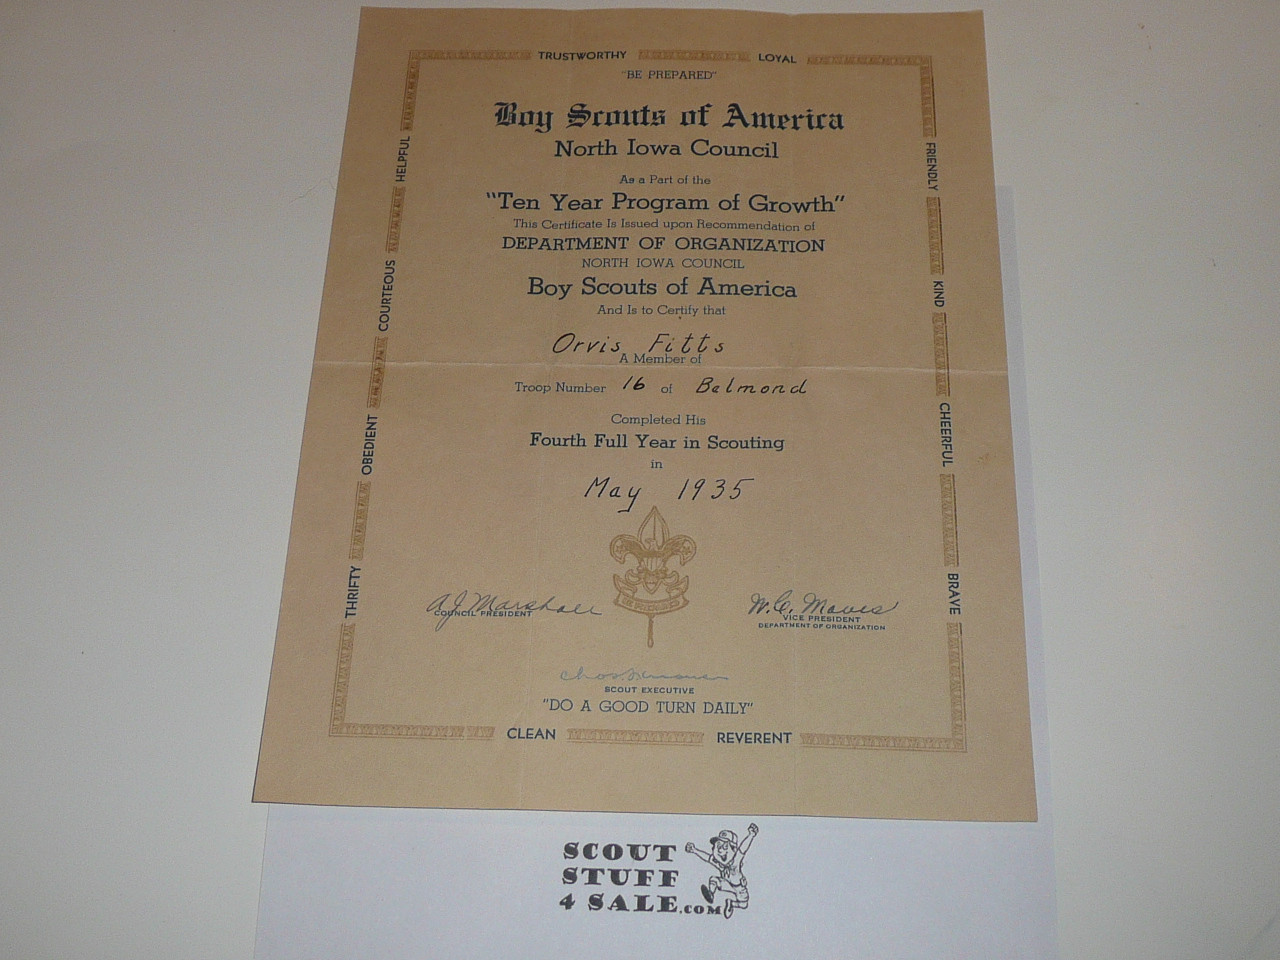 1935 North Iowa Council Ten Year Program of Growth Certificate